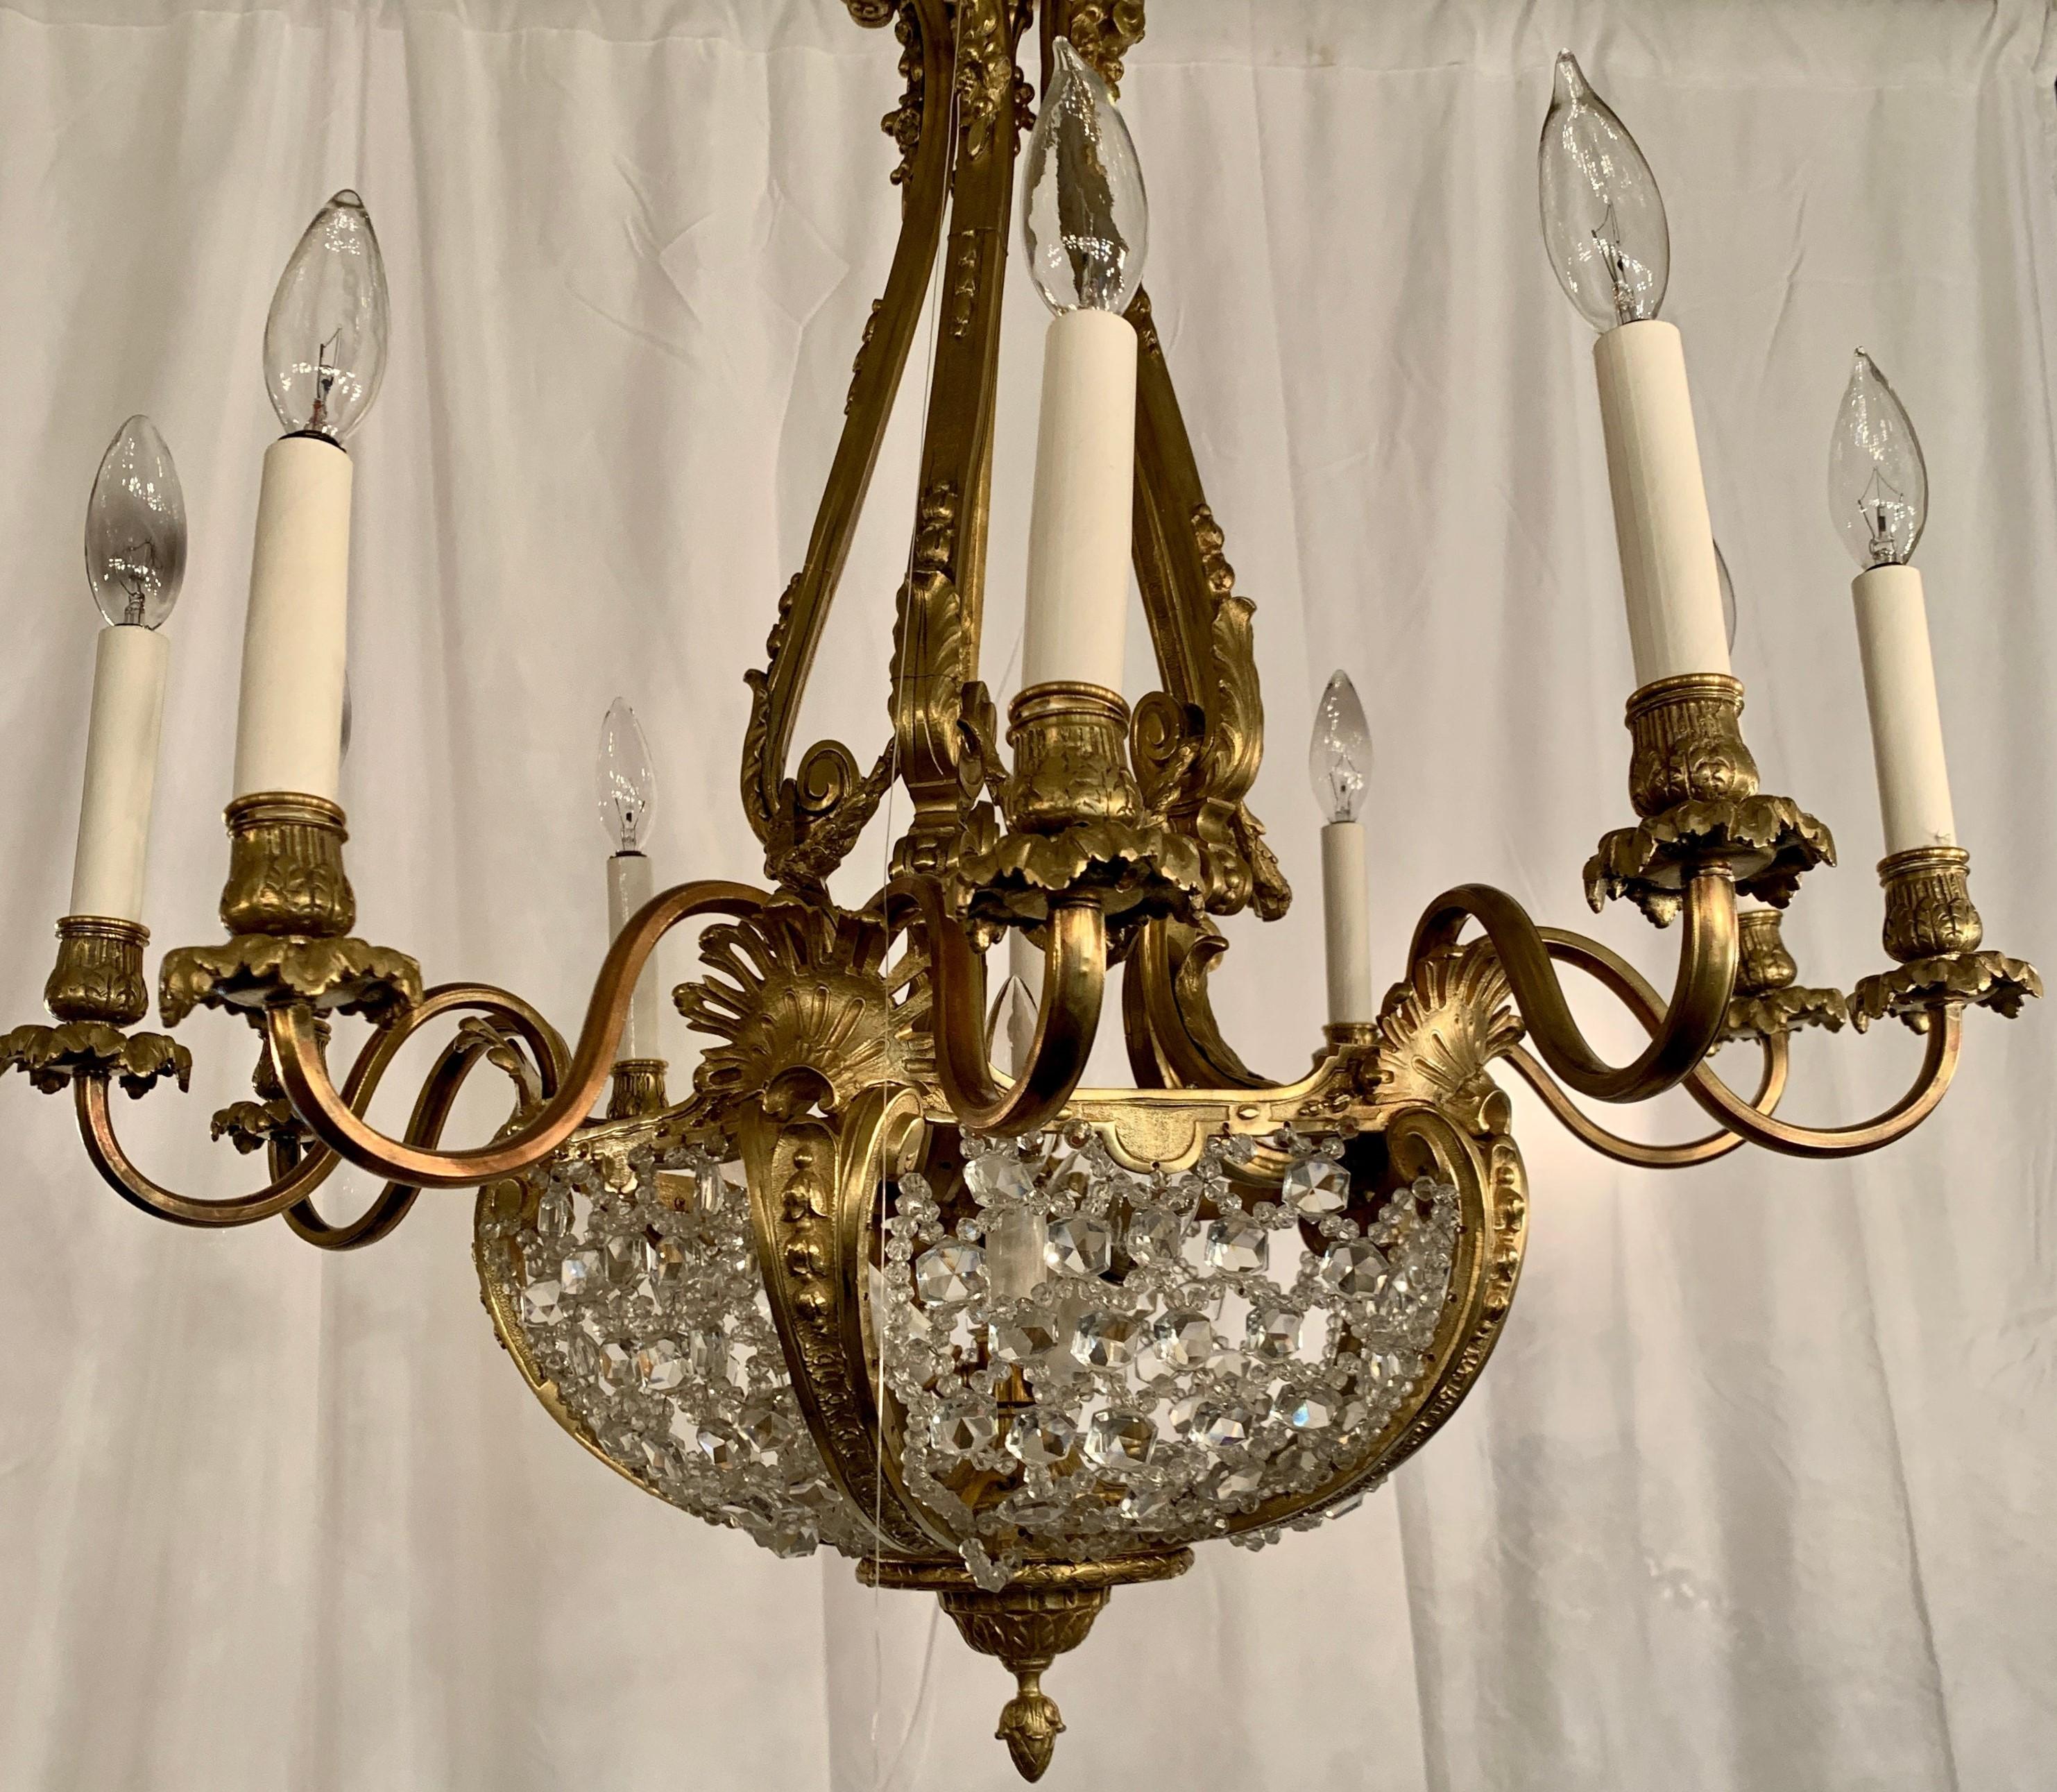 Late 19th Century Antique French Empress Eugenie Gold Bronze & Crystal Chandelier, Circa 1880-1890